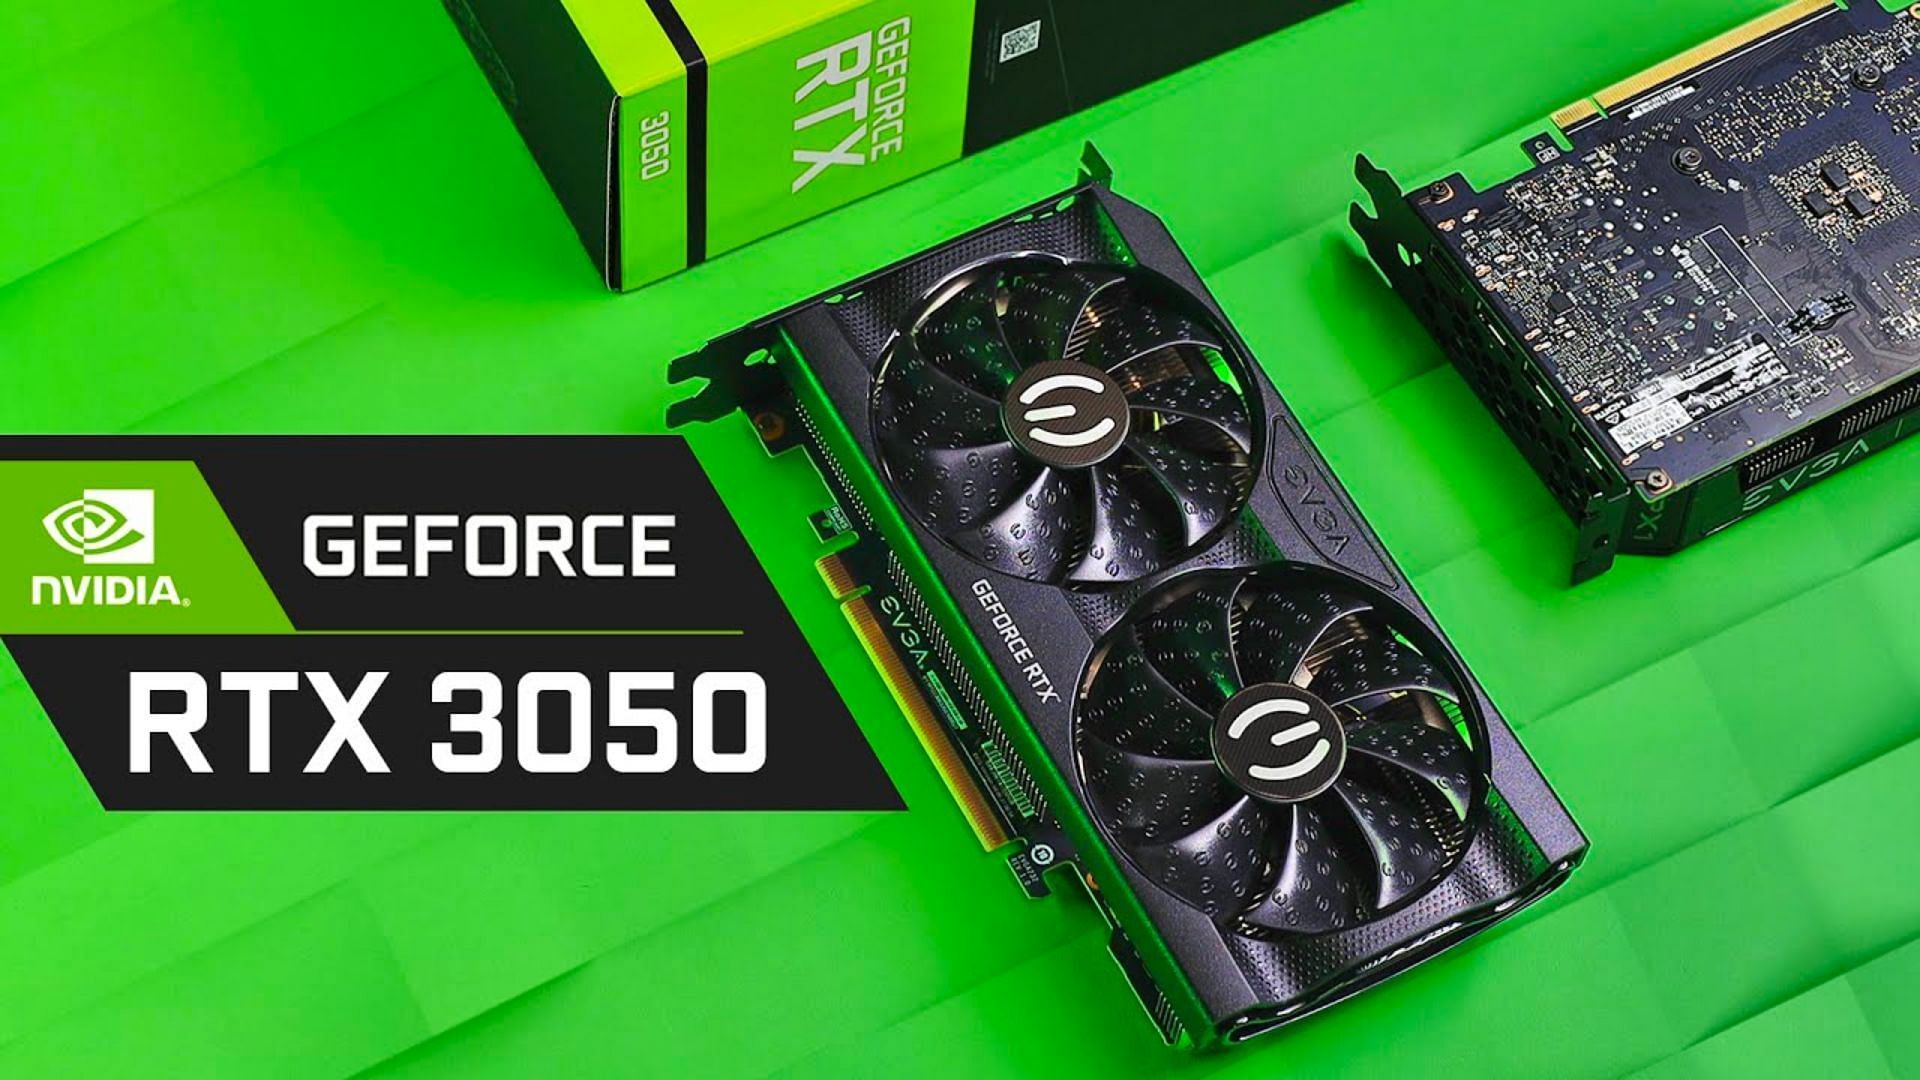 The Nvidia RTX 3050 6 GB and 8 GB video cards are entry-level options for gamers (Image via @HardwareCanucks/YouTube)